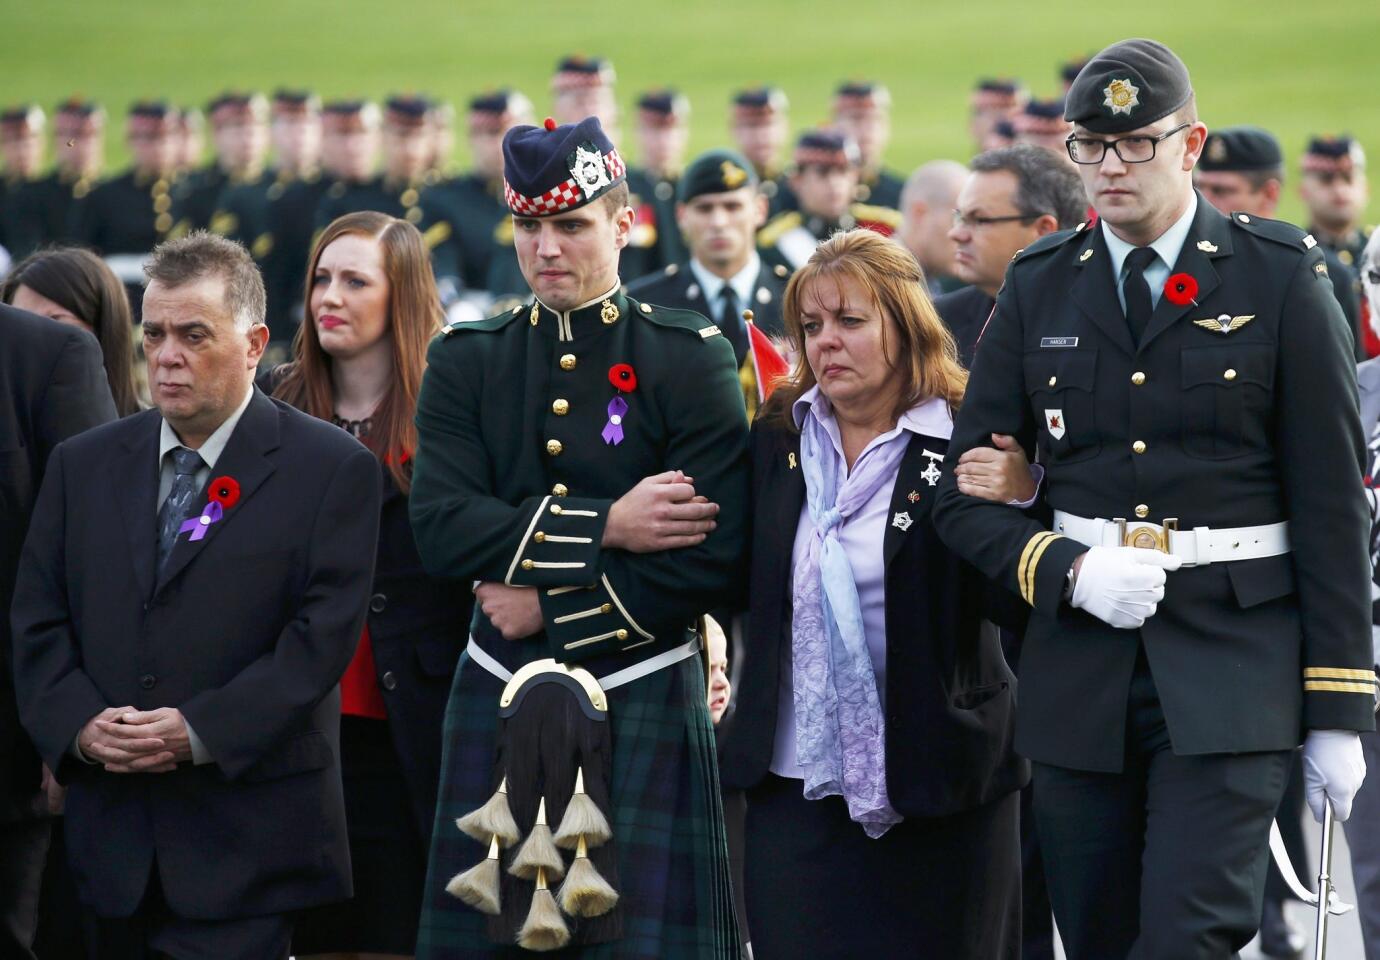 Soldiers escort Kathy Cirillo (2nd R) during the funeral procession for her son Cpl. Nathan Cirillo in Hamilton, Ontario October 28, 2014.